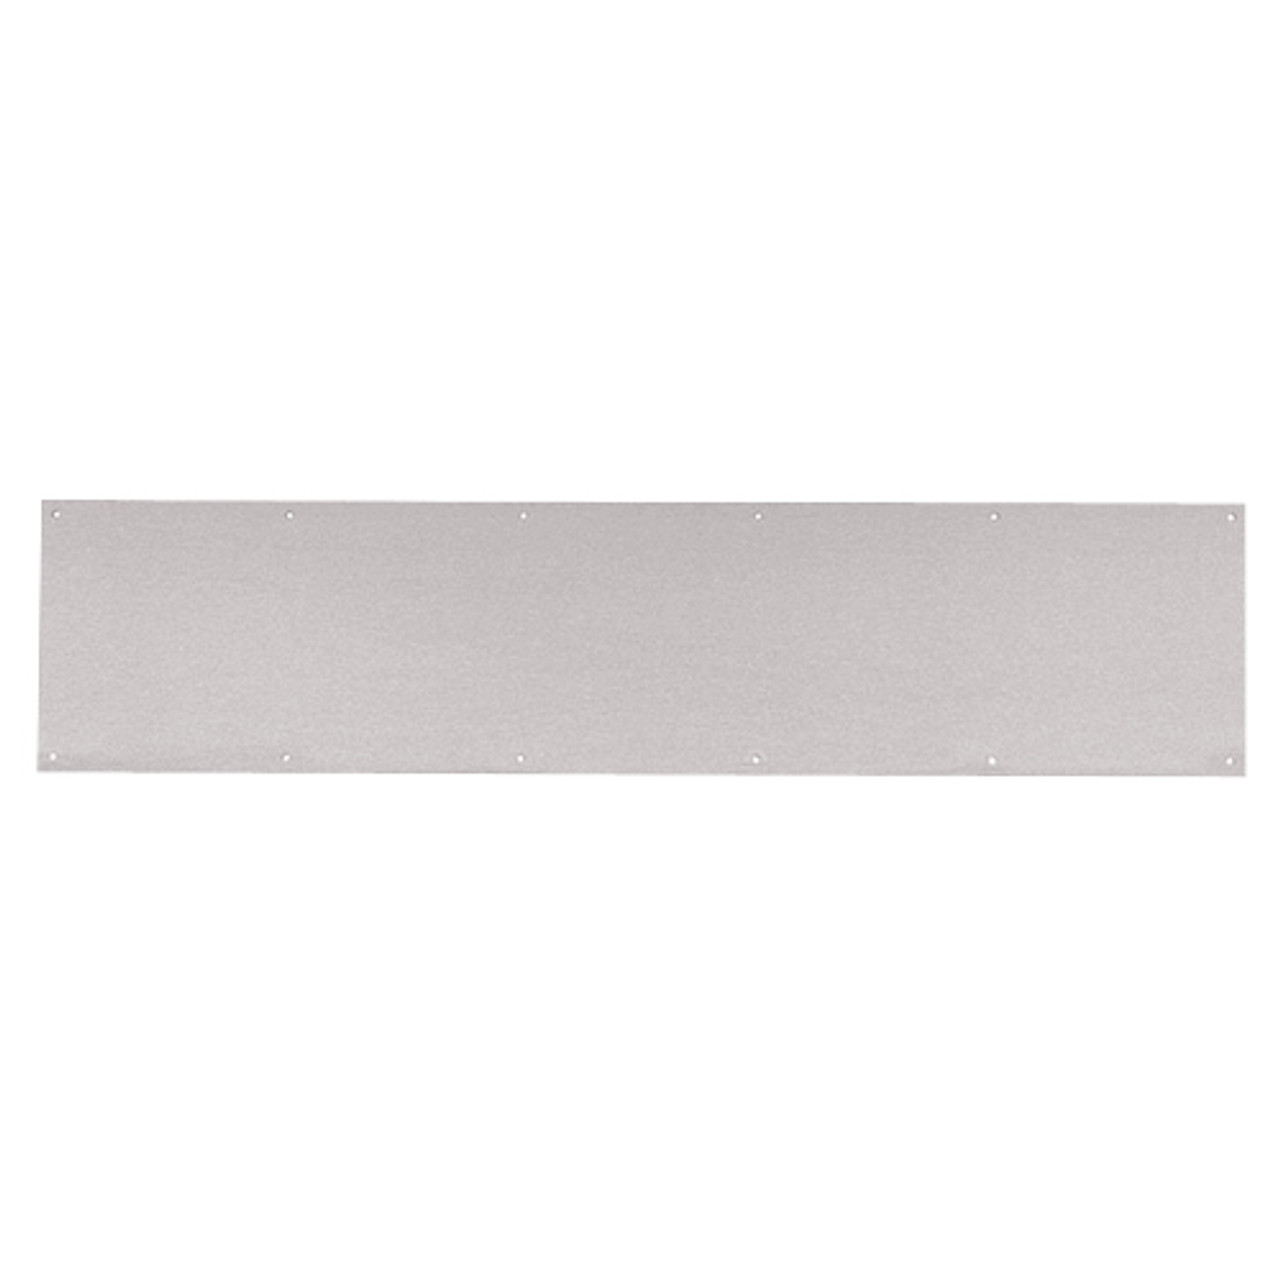 8400-US32D-28x35-B-CS Ives 8400 Series Protection Plate in Satin Stainless Steel